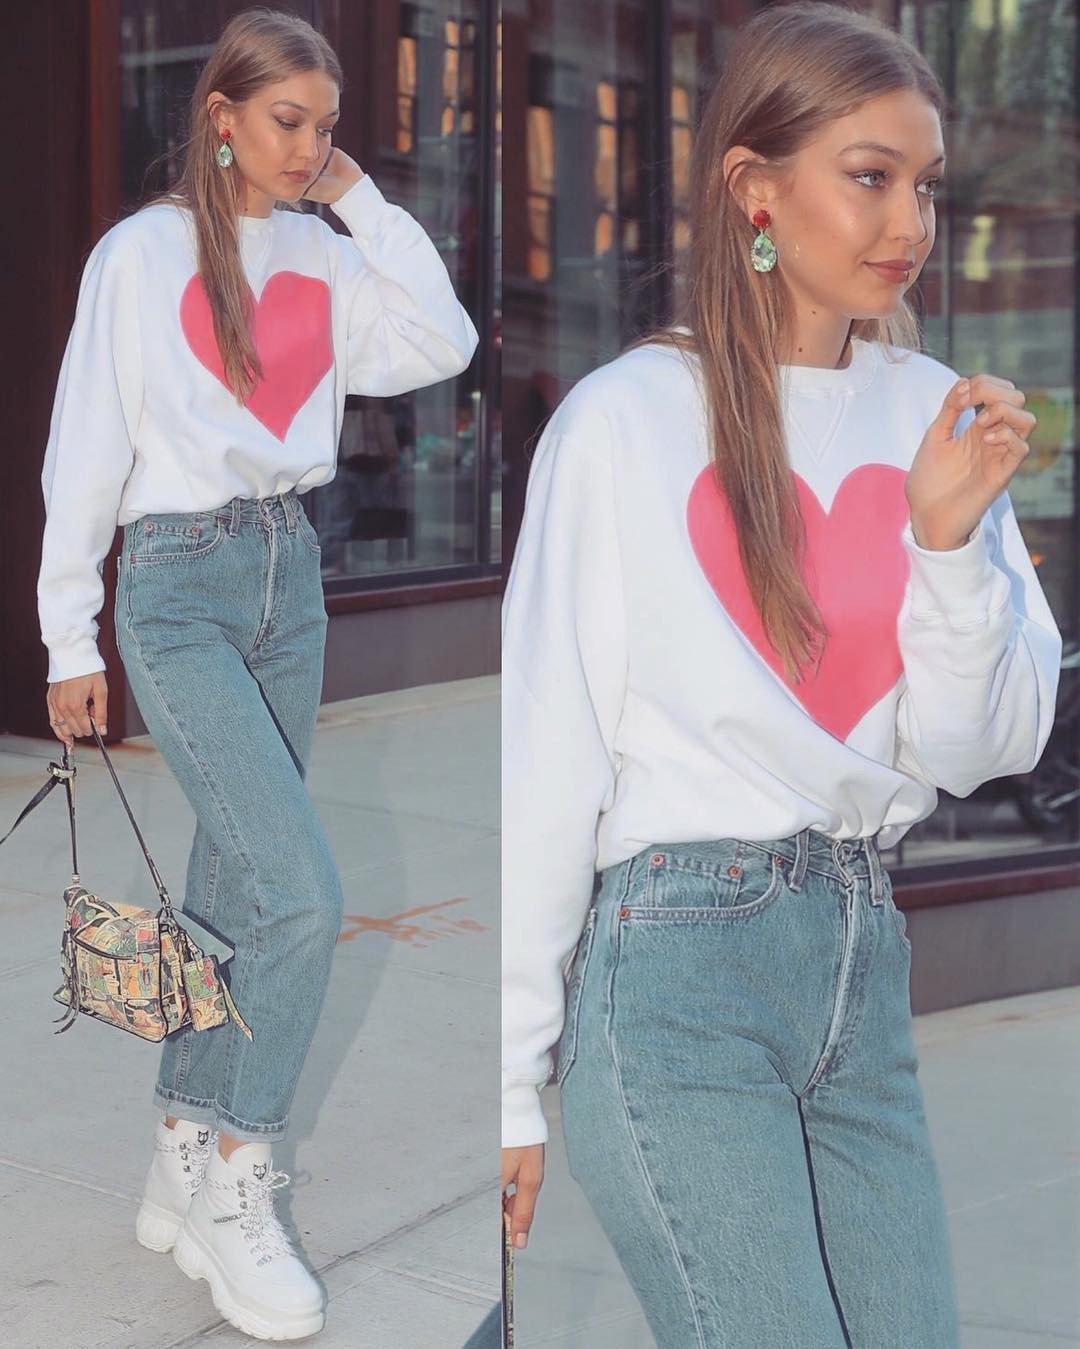 Latest Recent Gigi Hadid Pictures Insta: Instagram photos,  Hot Instagram Models,  most liked Instagram photo,  gigihadid,  Instagram Gigi Hadid,  Gigi Hadid,  Instagram pictures,  Super Hot Gigi Hadid  